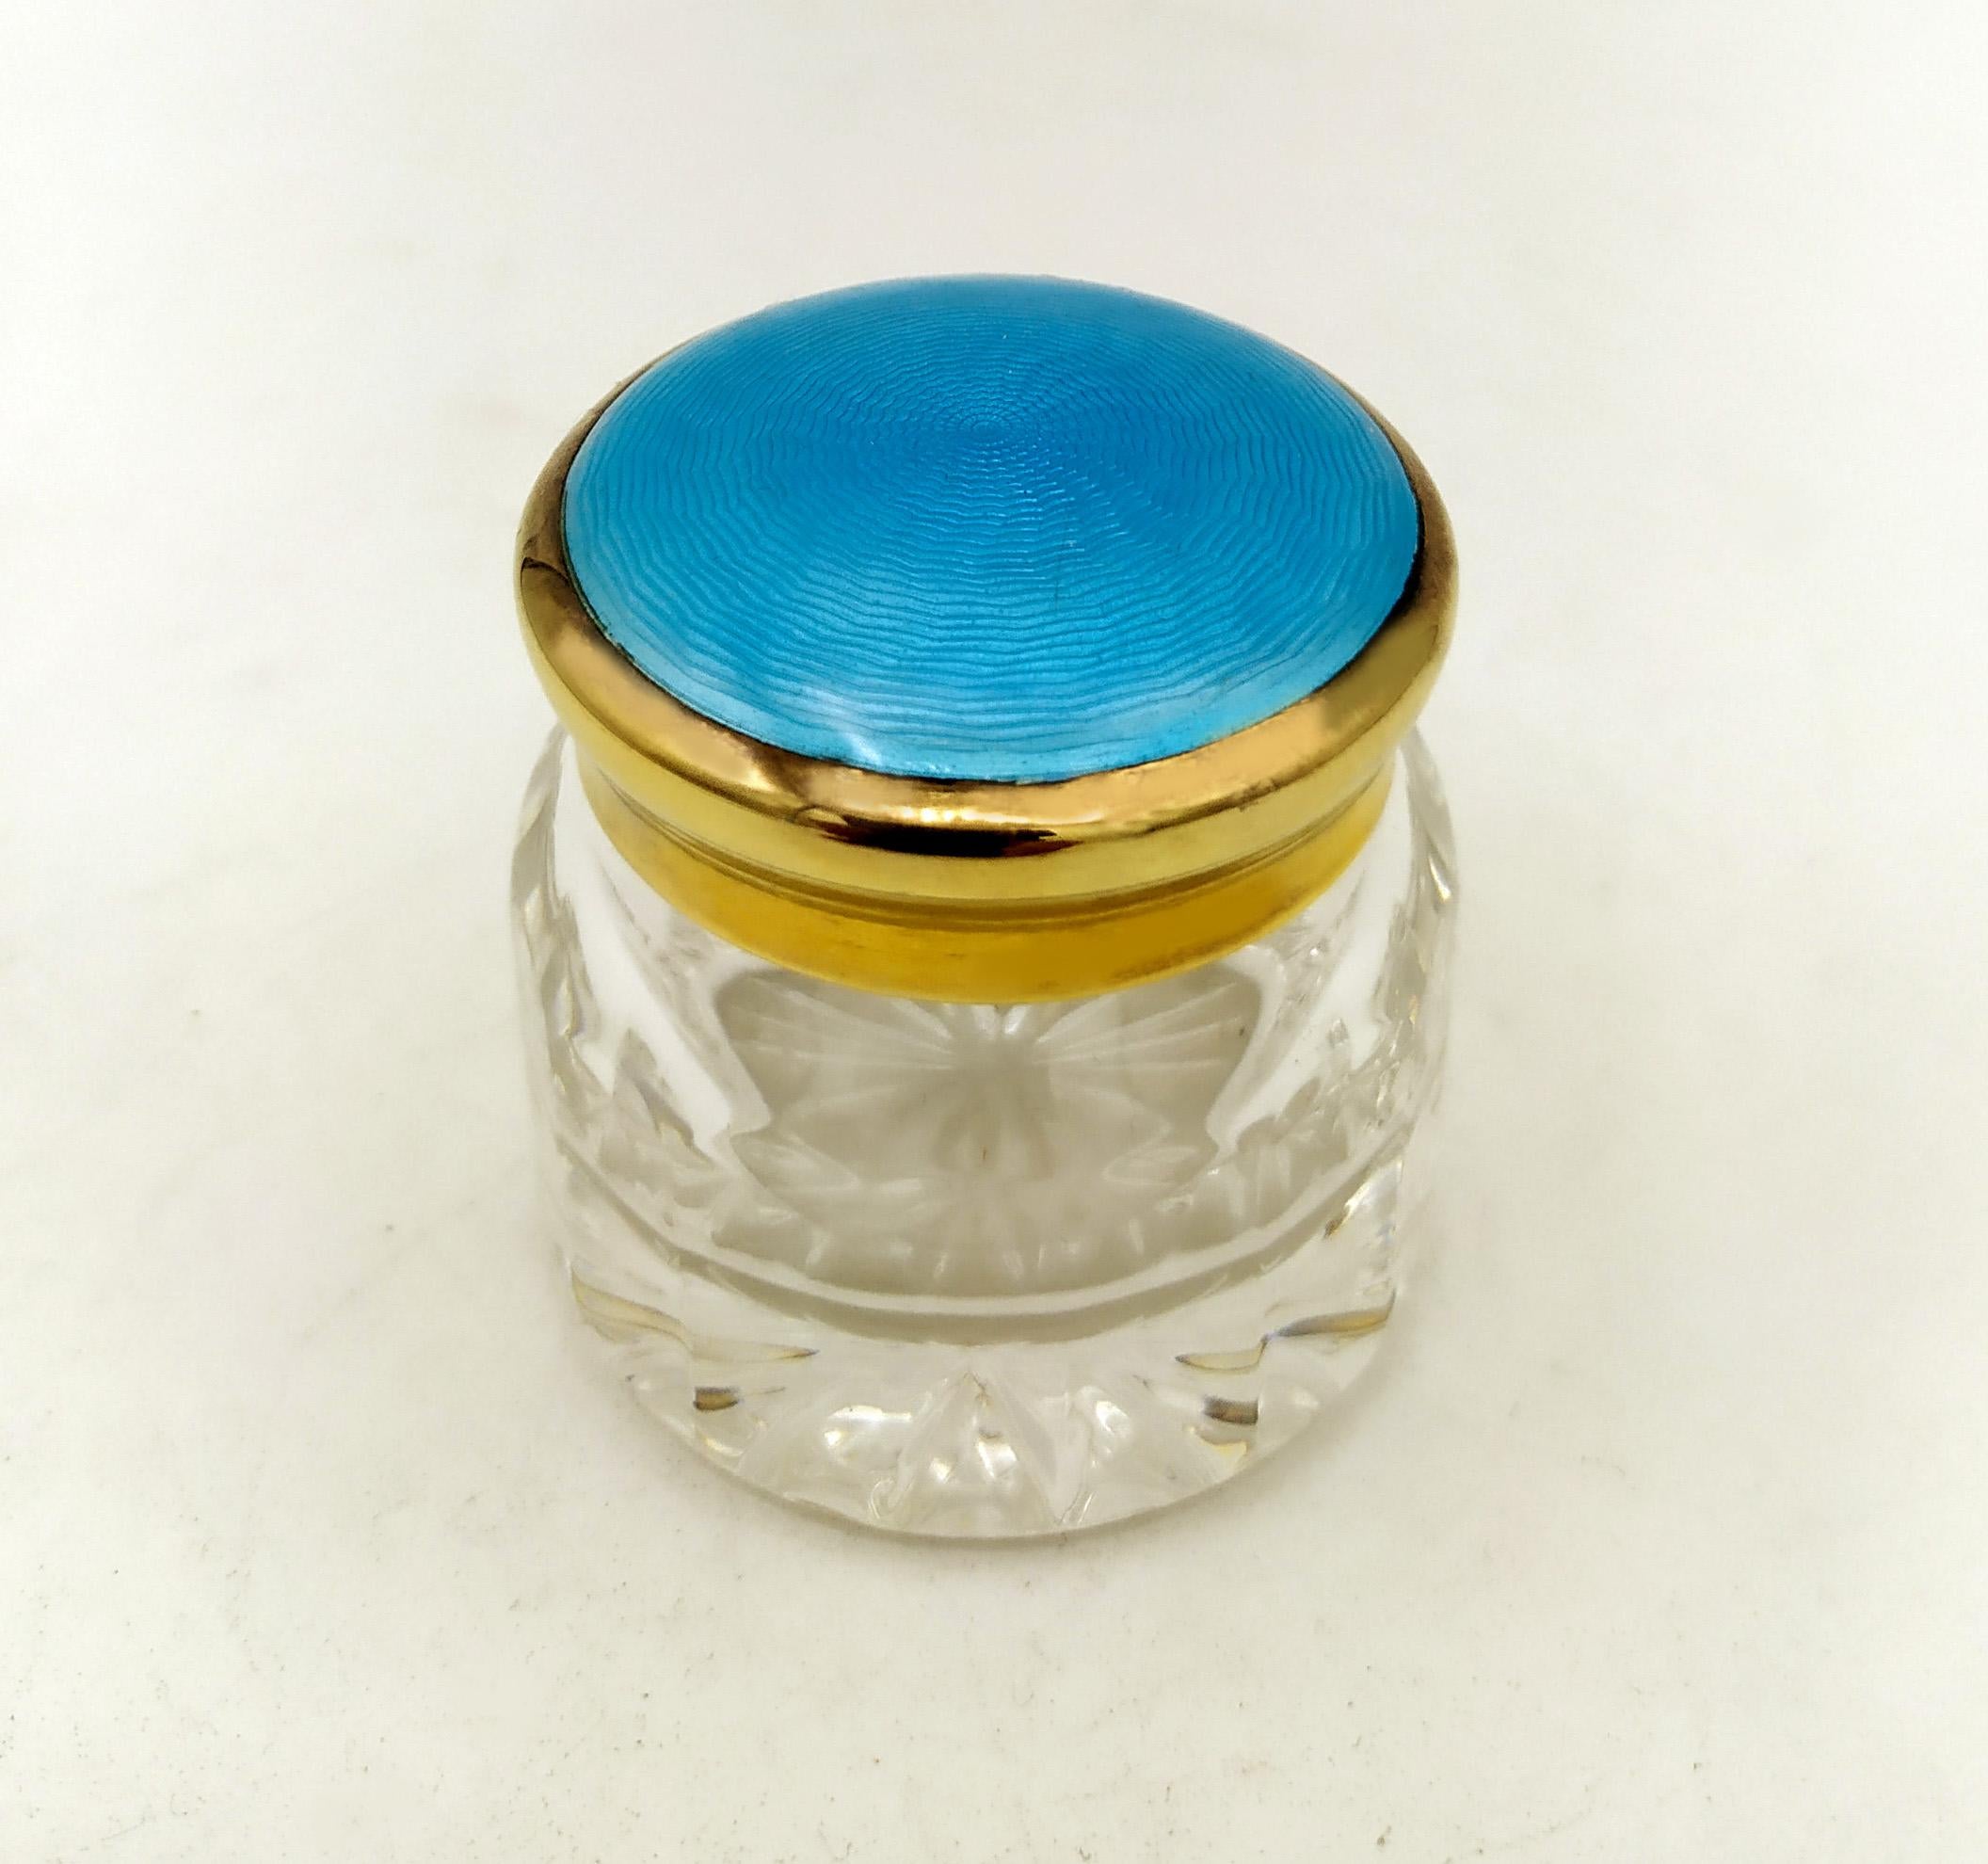 Round favor Box with lid in 925/1000 Sterling Silver Light Blue Enamel Salimbeni. Favor or small container in cut crystal and lid in 925/1000 sterling silver gold plated with translucent fired enamel on guillochè. Diameter cm. 4.2 total height cm.